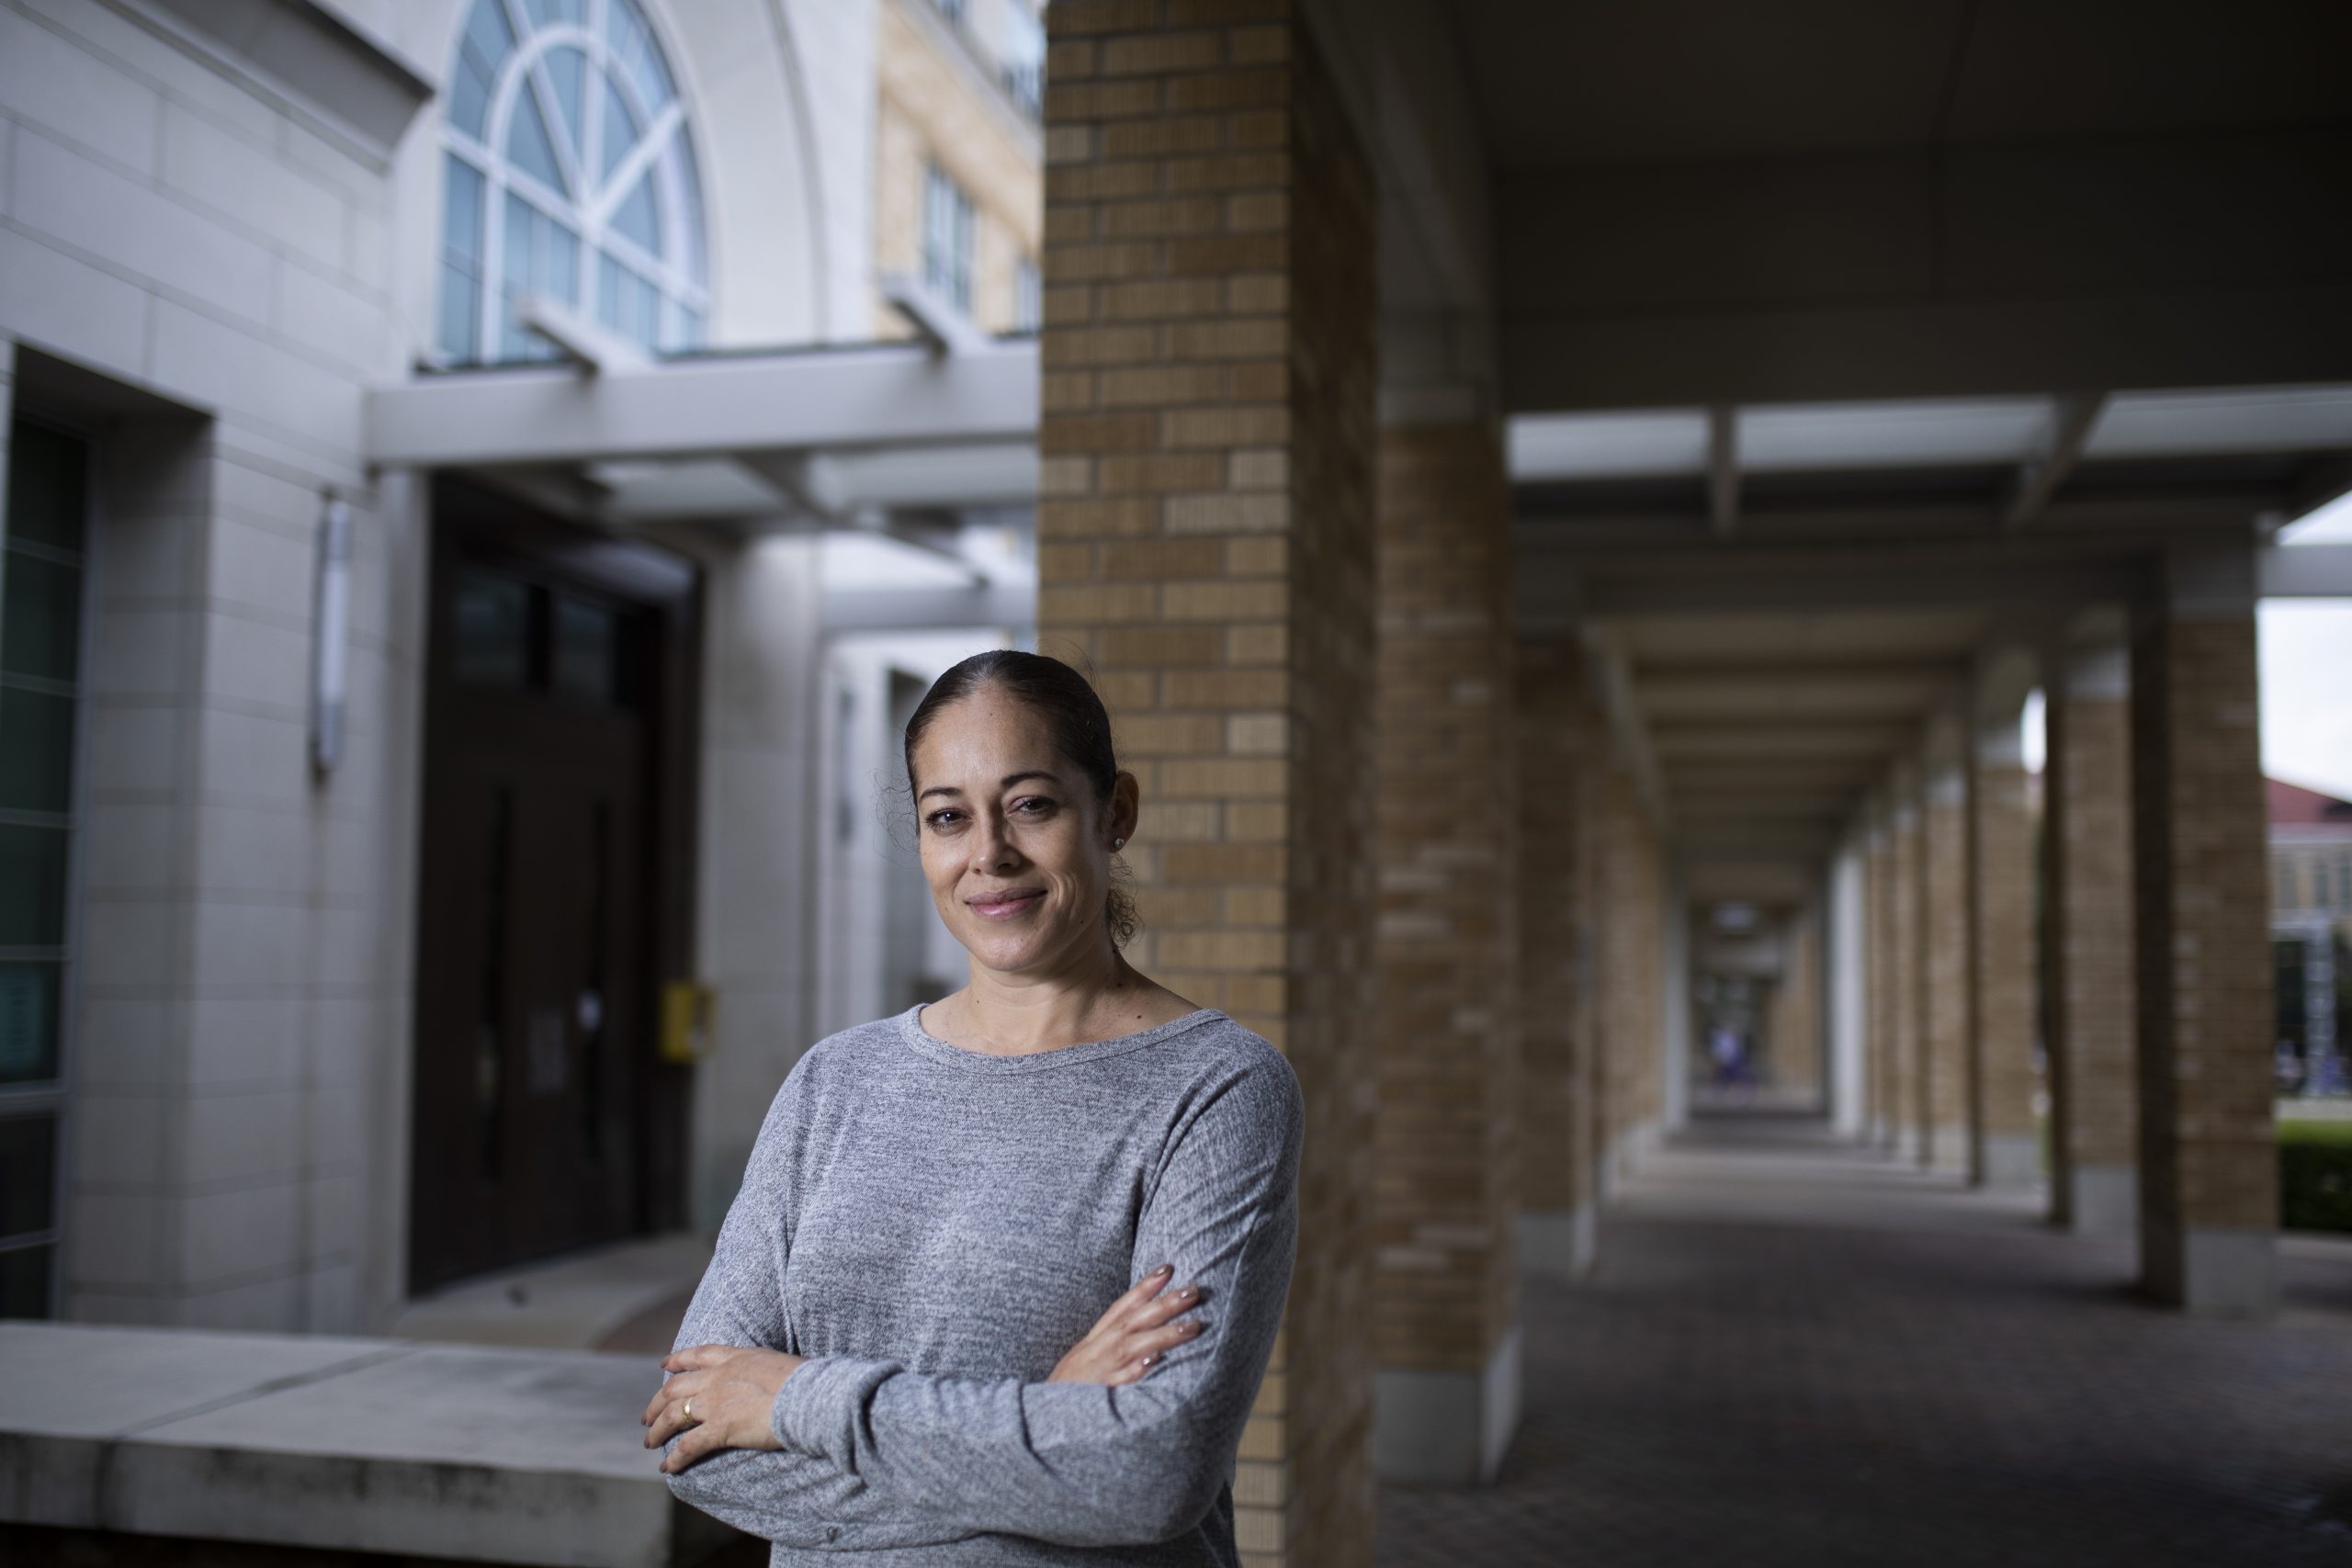 Residential housekeeping service assistant Vicenta Barron is one of several TCU employees who have partnered with students to help each other become more fluent in a second language. Photographed on the TCU campus by Rodger Mallison, November 10, 2021